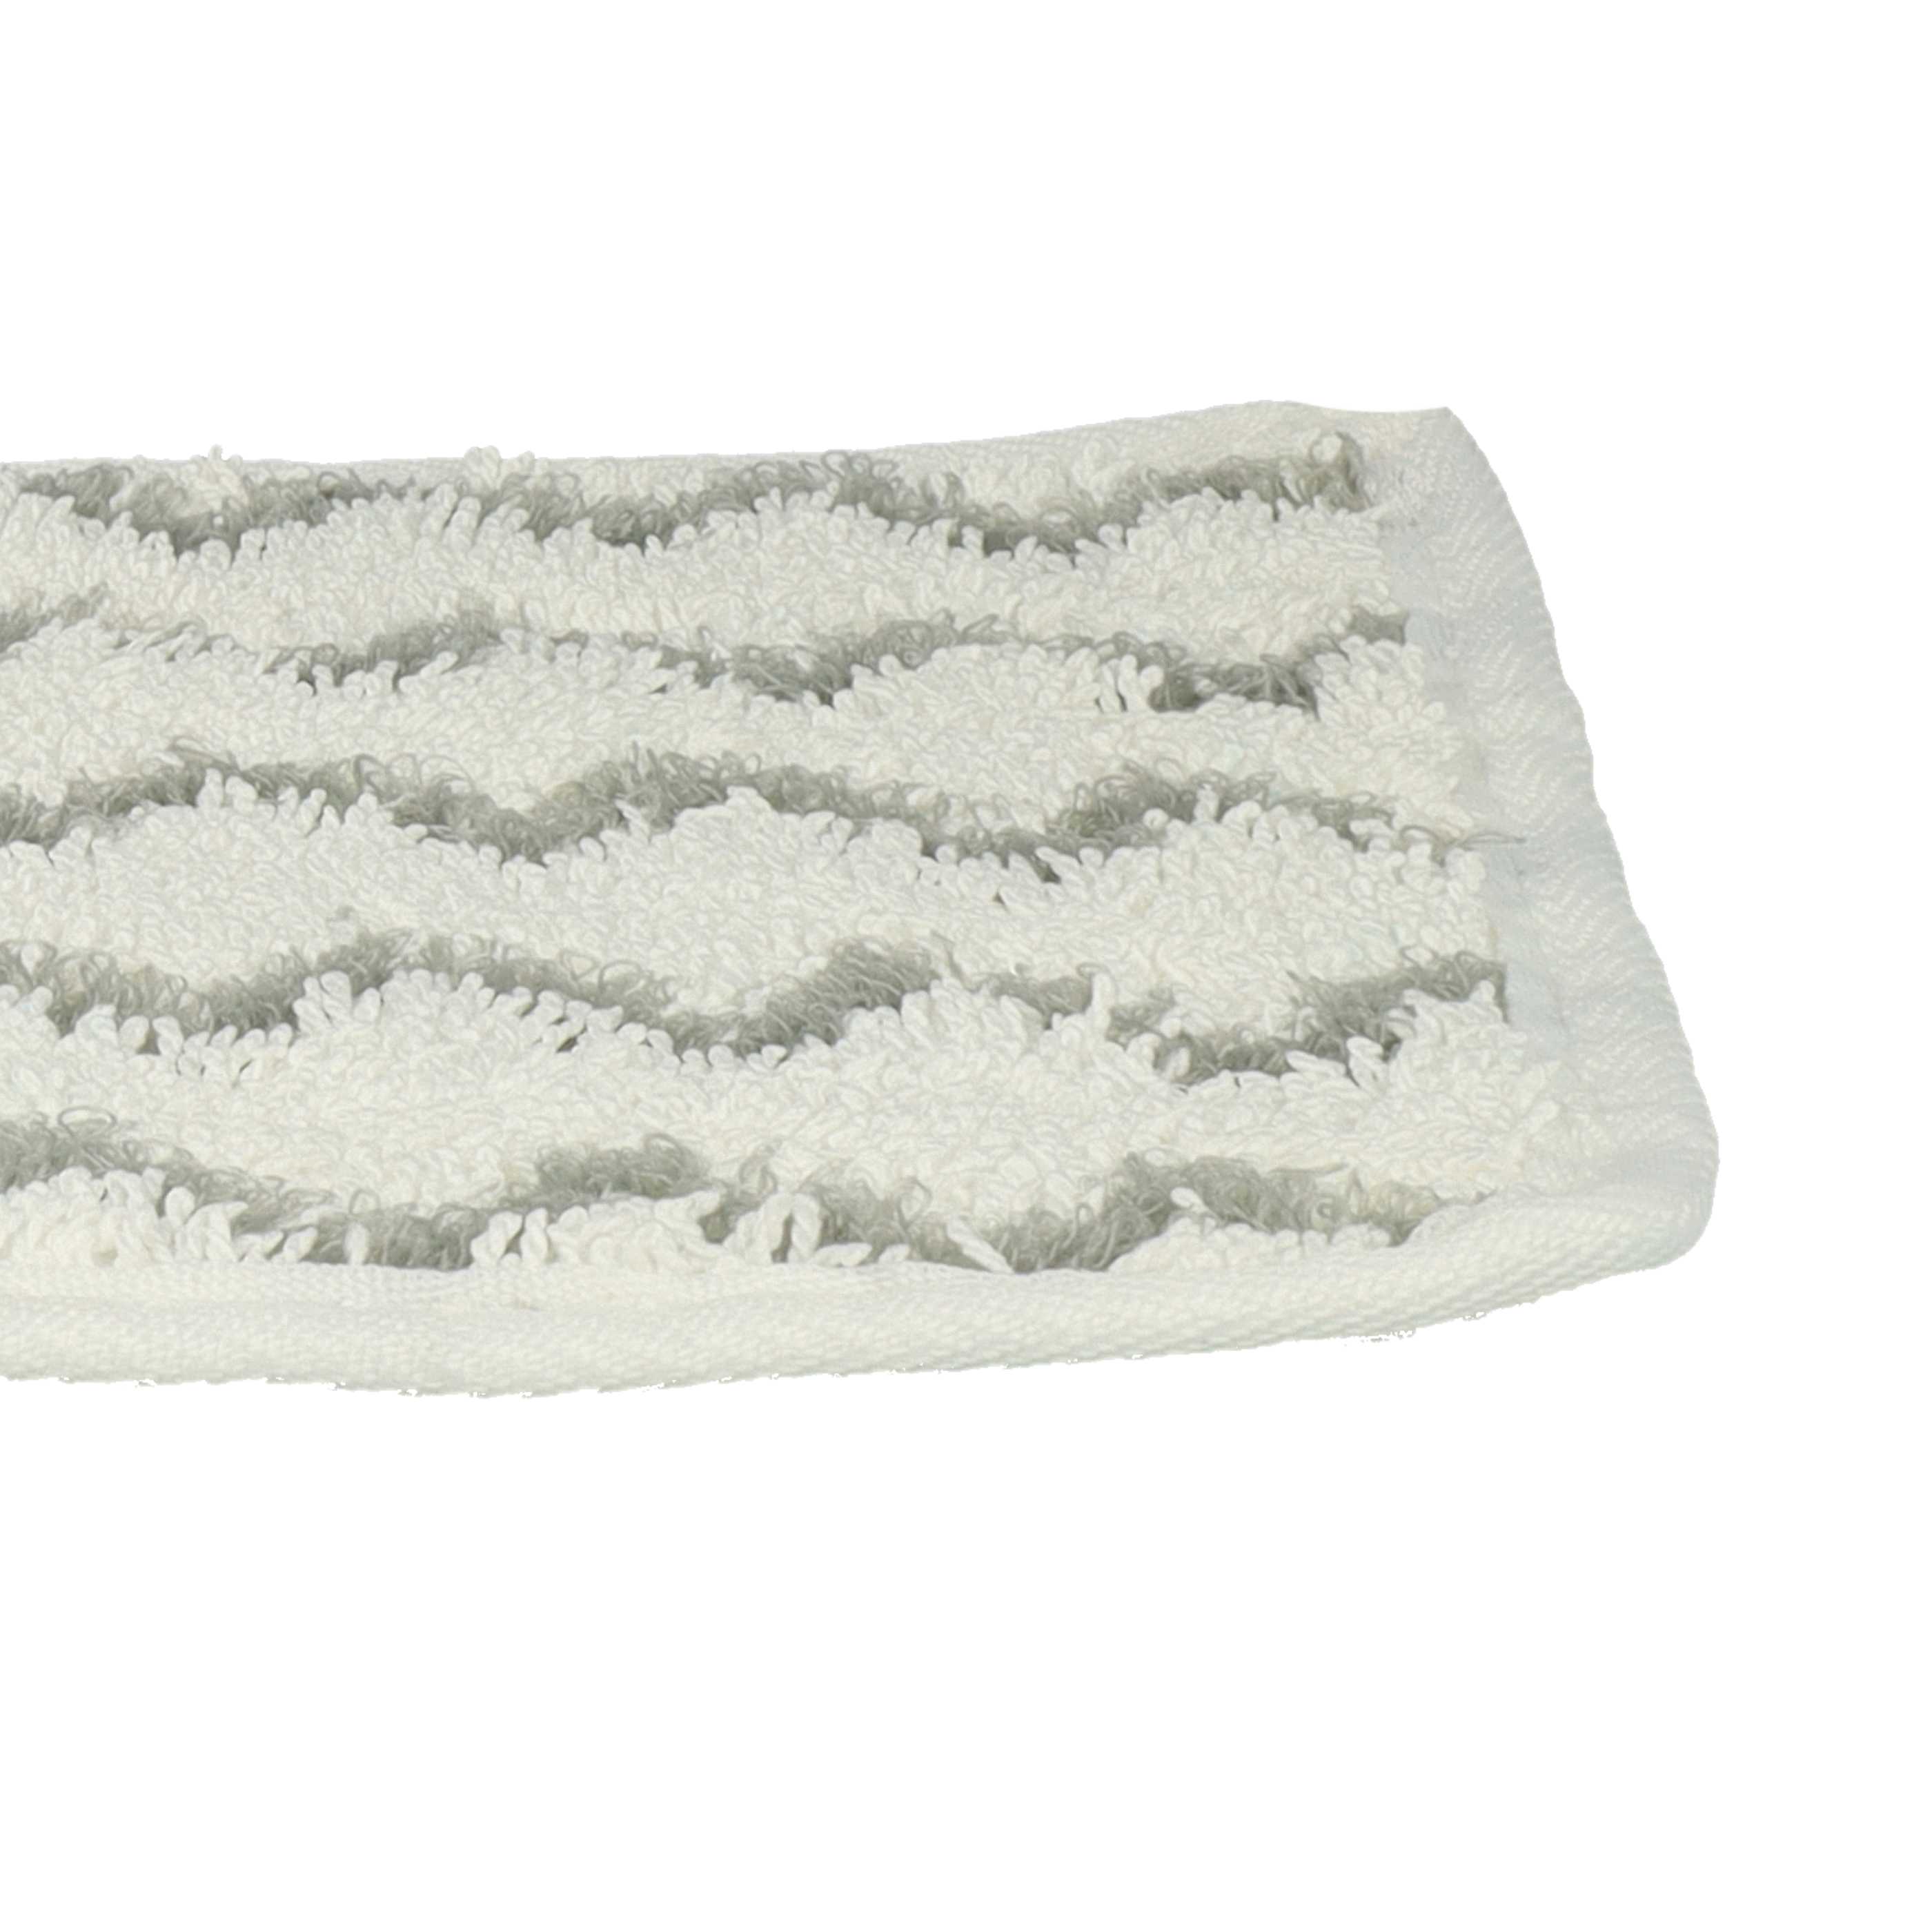 10x Cleaning Pad replaces Vileda 161717 for ViledaHot Spray Steamer, Steam Mop - Microfibre Grey White